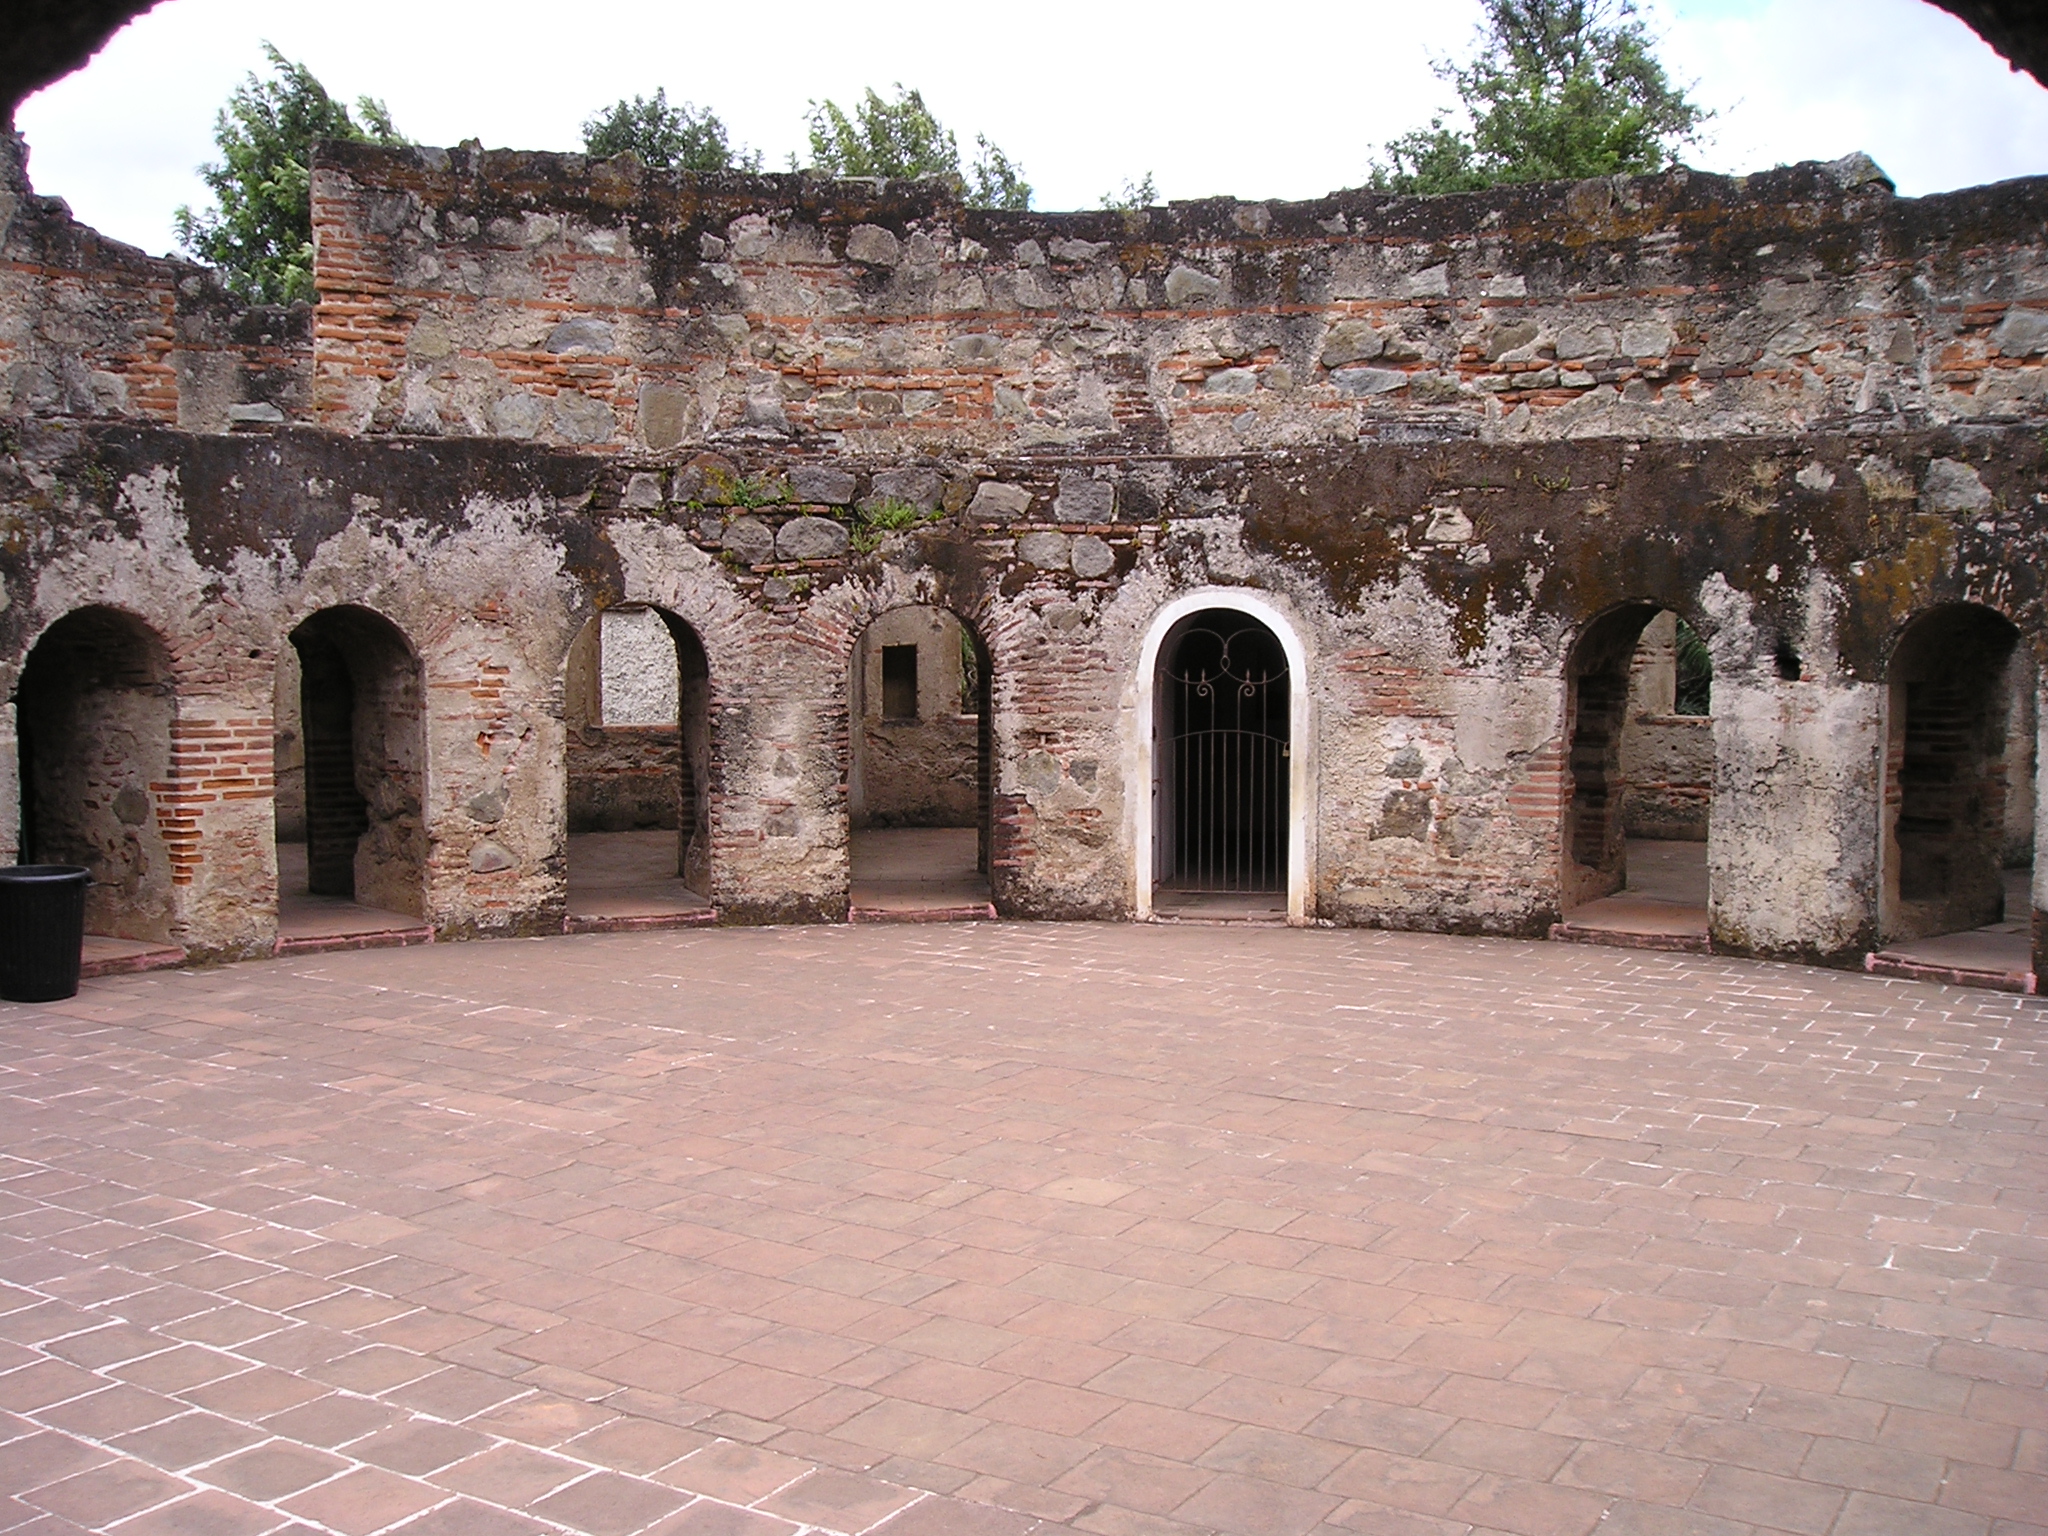 a stone building has many doorways and arches